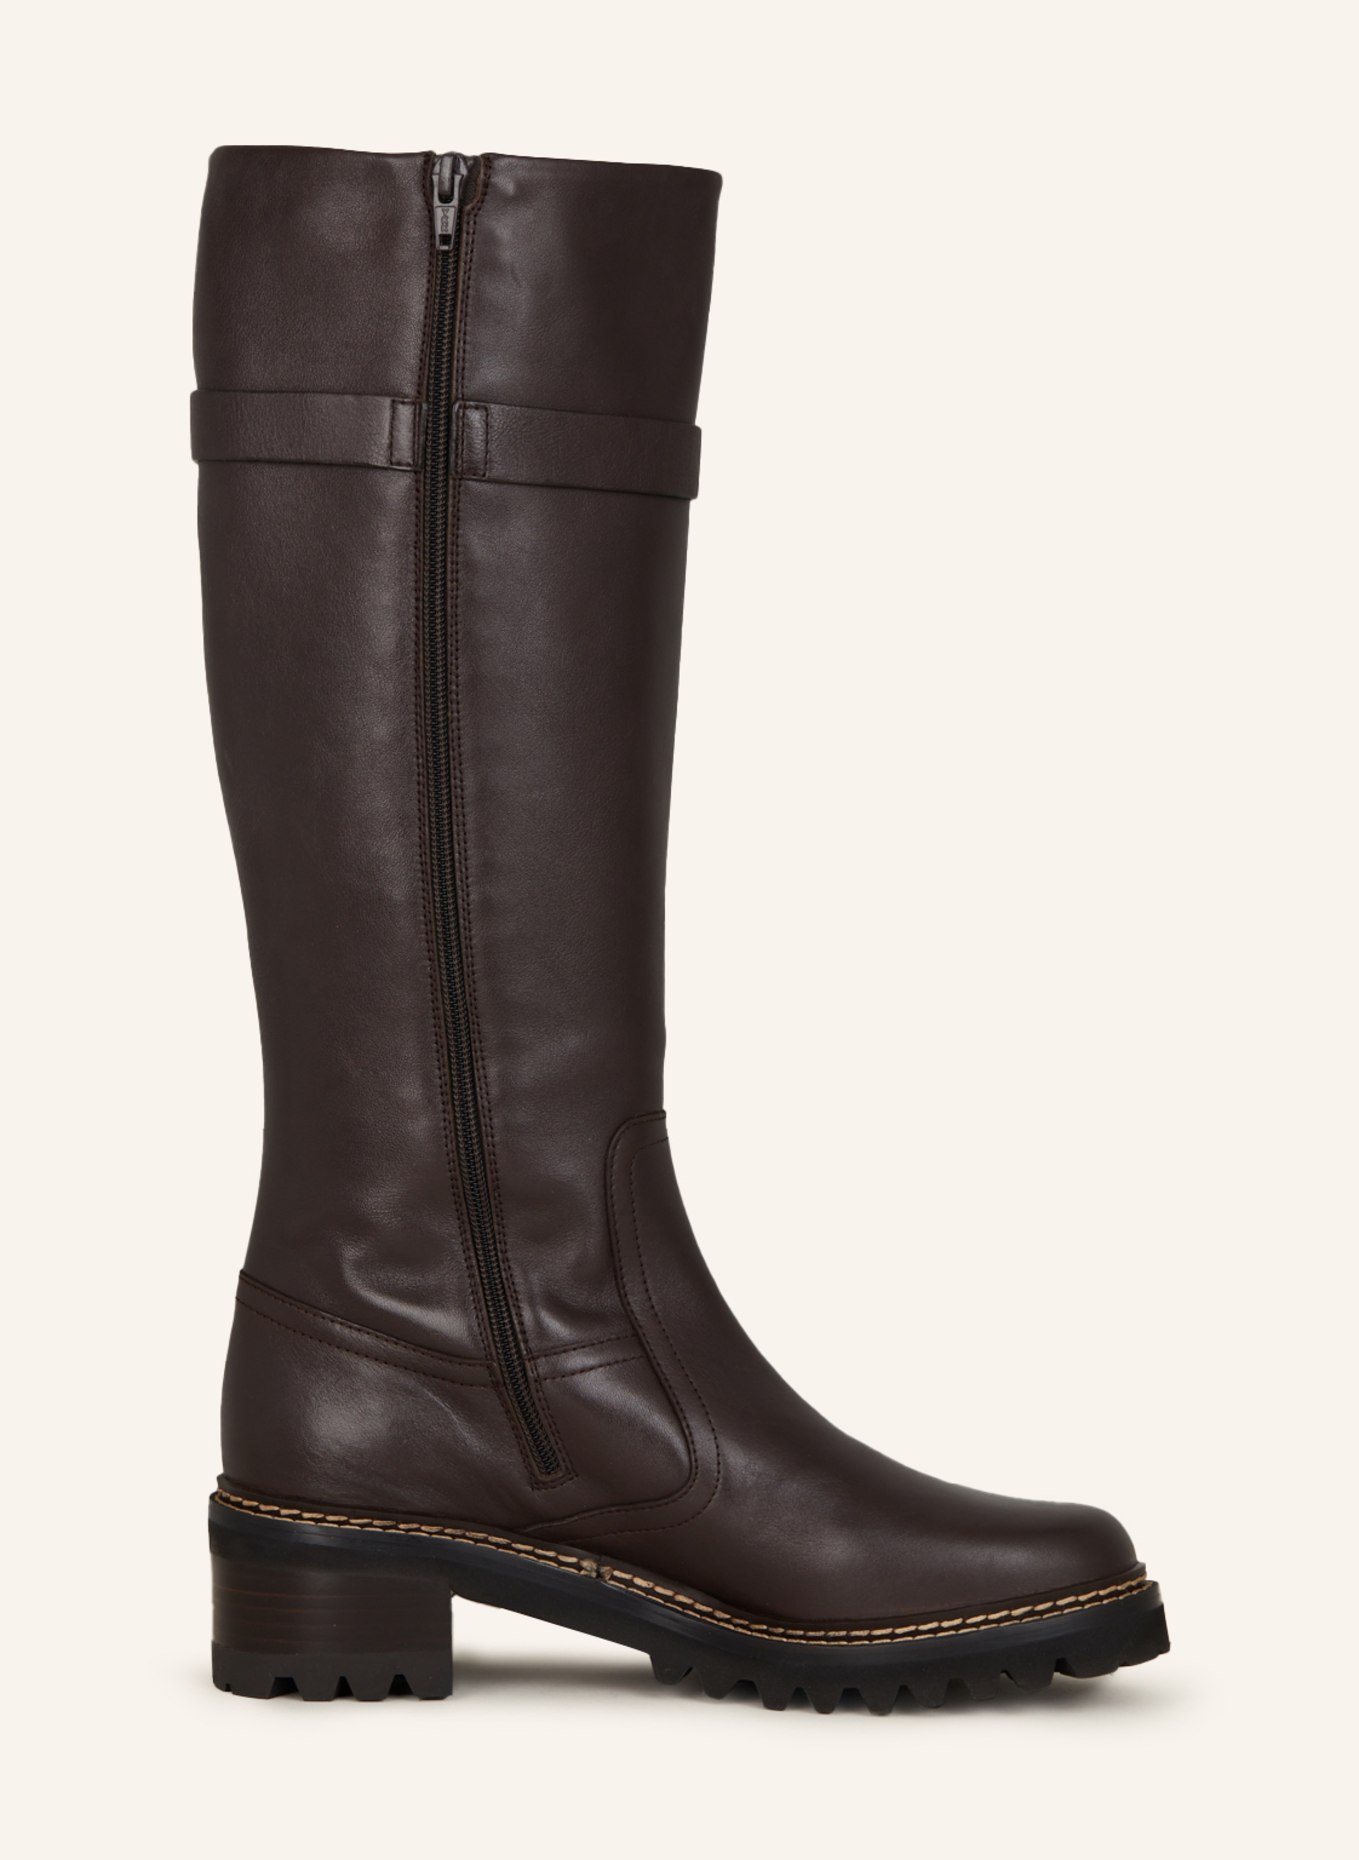 SEE BY CHLOÉ Boots HANA, Color: DARK BROWN (Image 5)